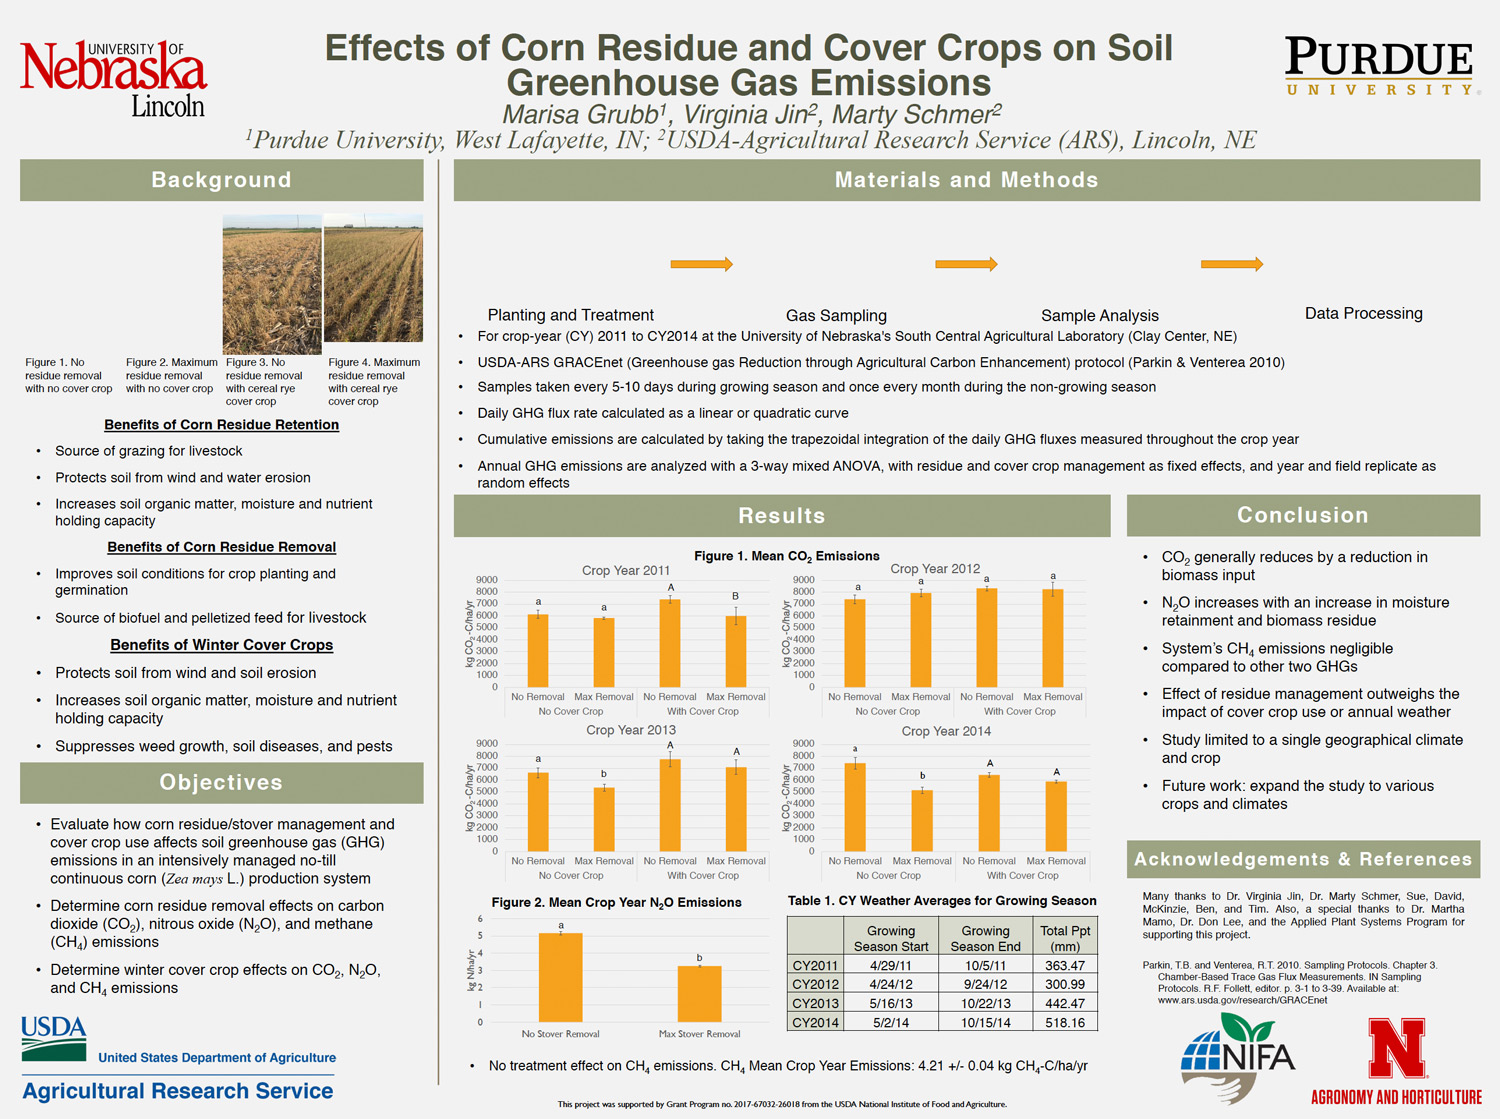 Effects of Corn Residue and Cover Crops on Soil Greenhouse Gas Emissions poster